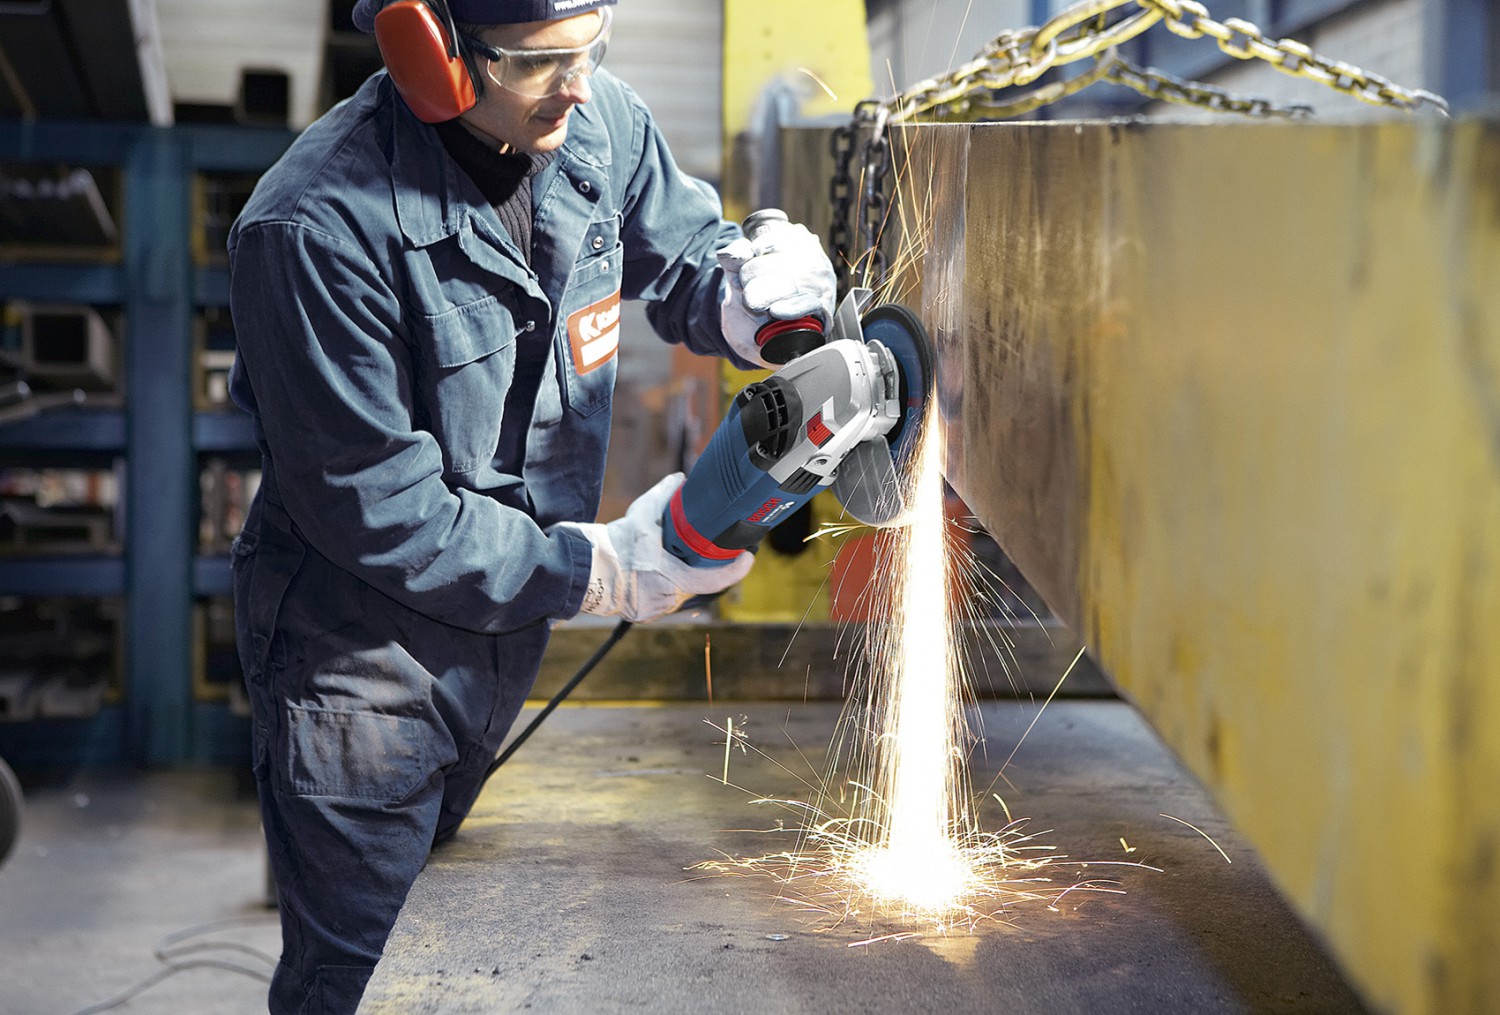 More powerful cordless angle grinder from Bosch for grinding, cutting or roughing